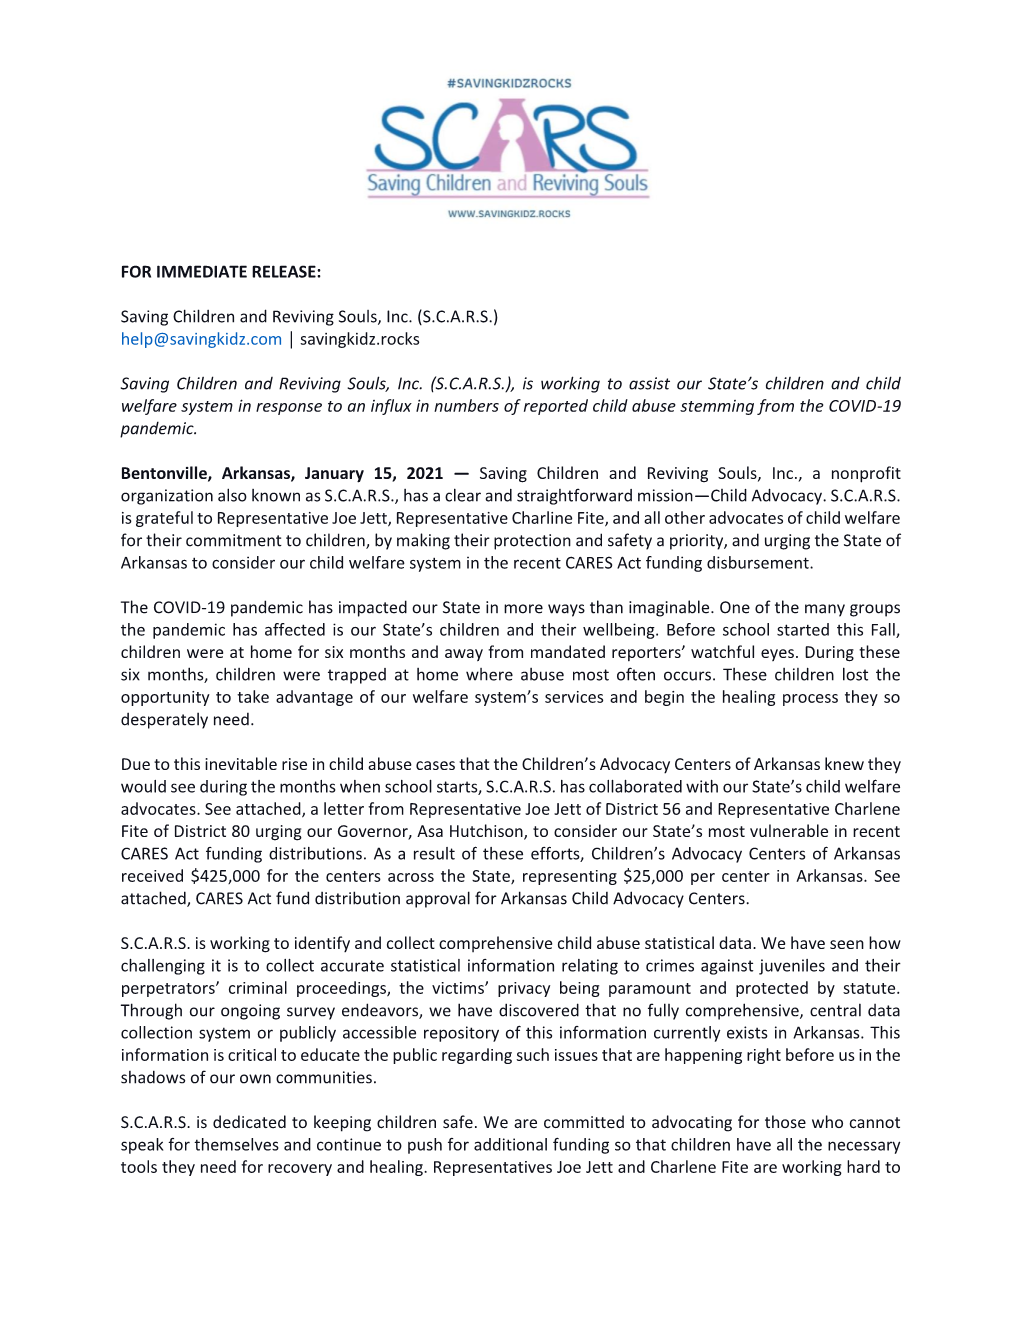 FOR IMMEDIATE RELEASE: Saving Children and Reviving